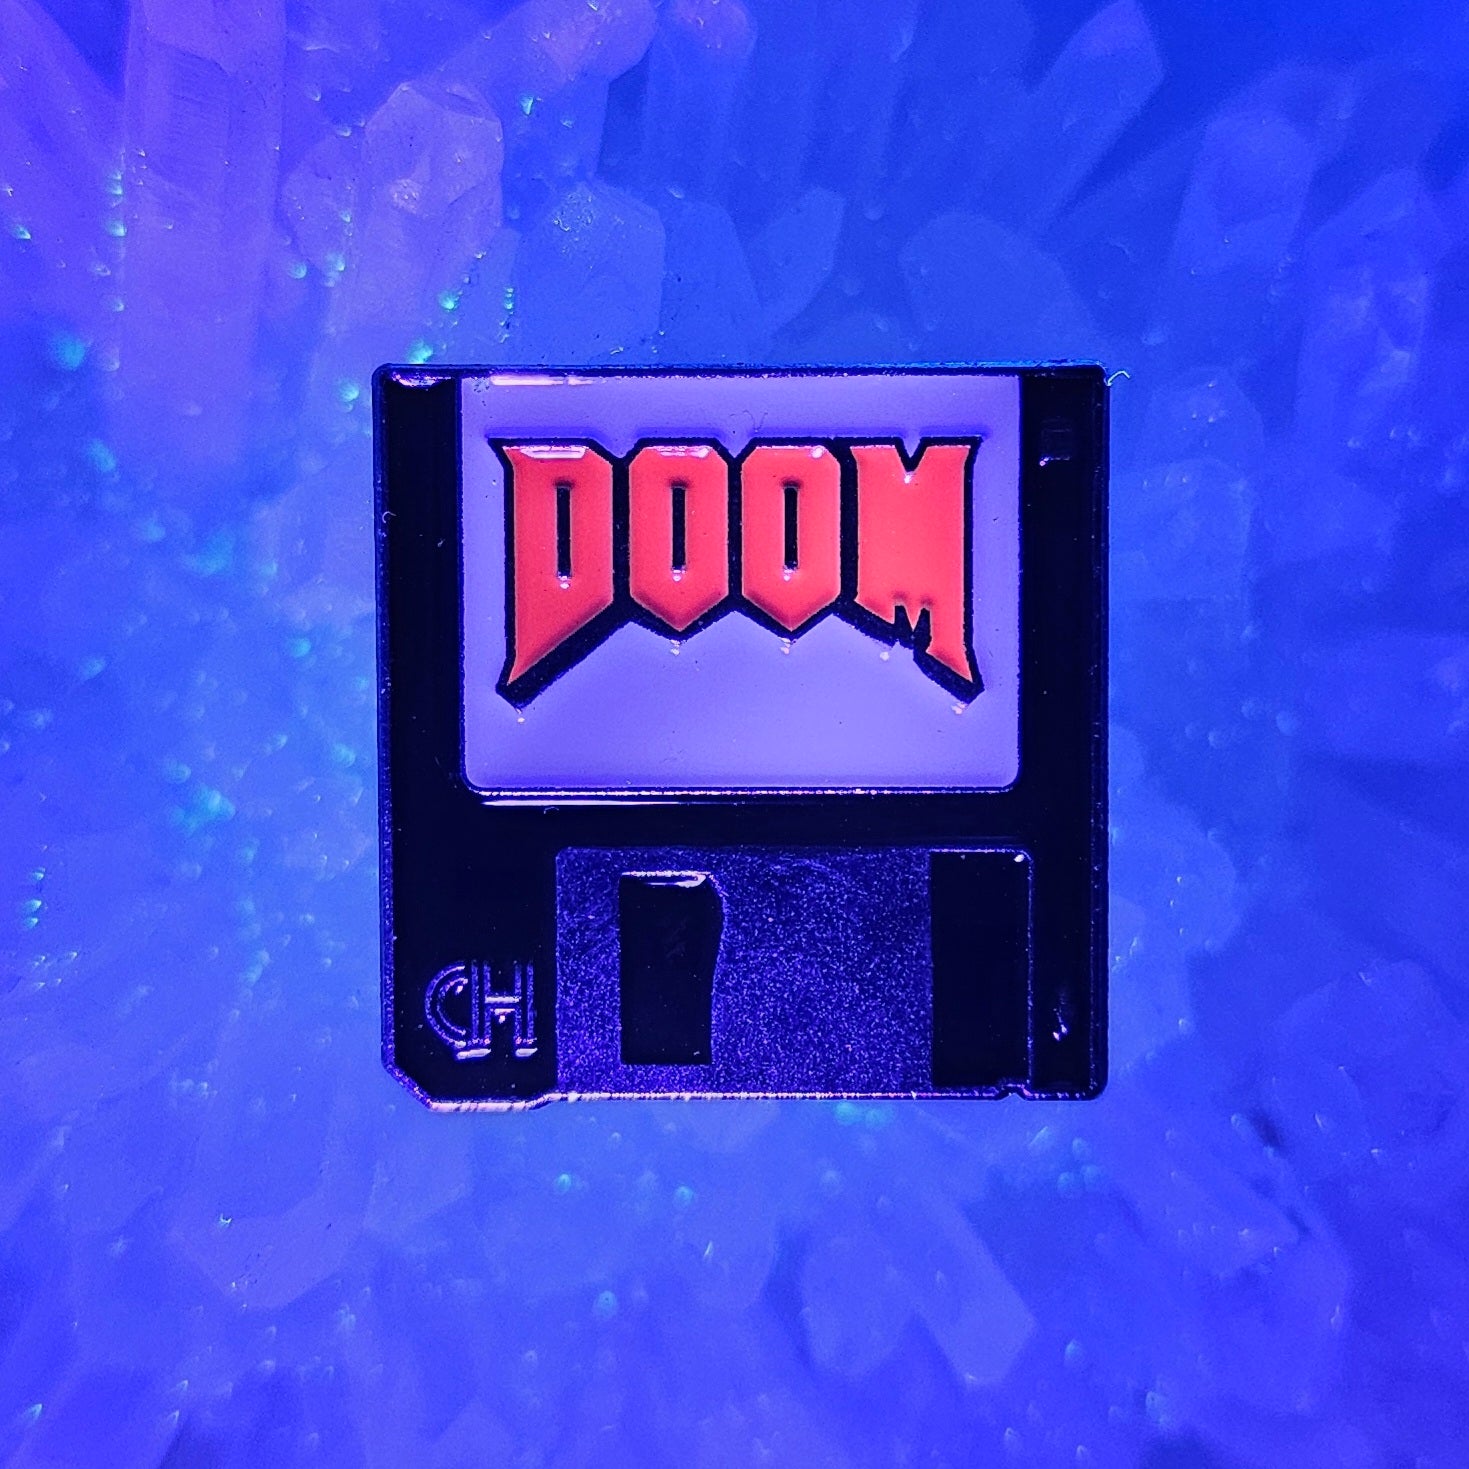 Doom Floppy Rampage Classic Video Game Relic Enamel Pins Hat Pins Lapel Pin Brooch Badge Festival Pin